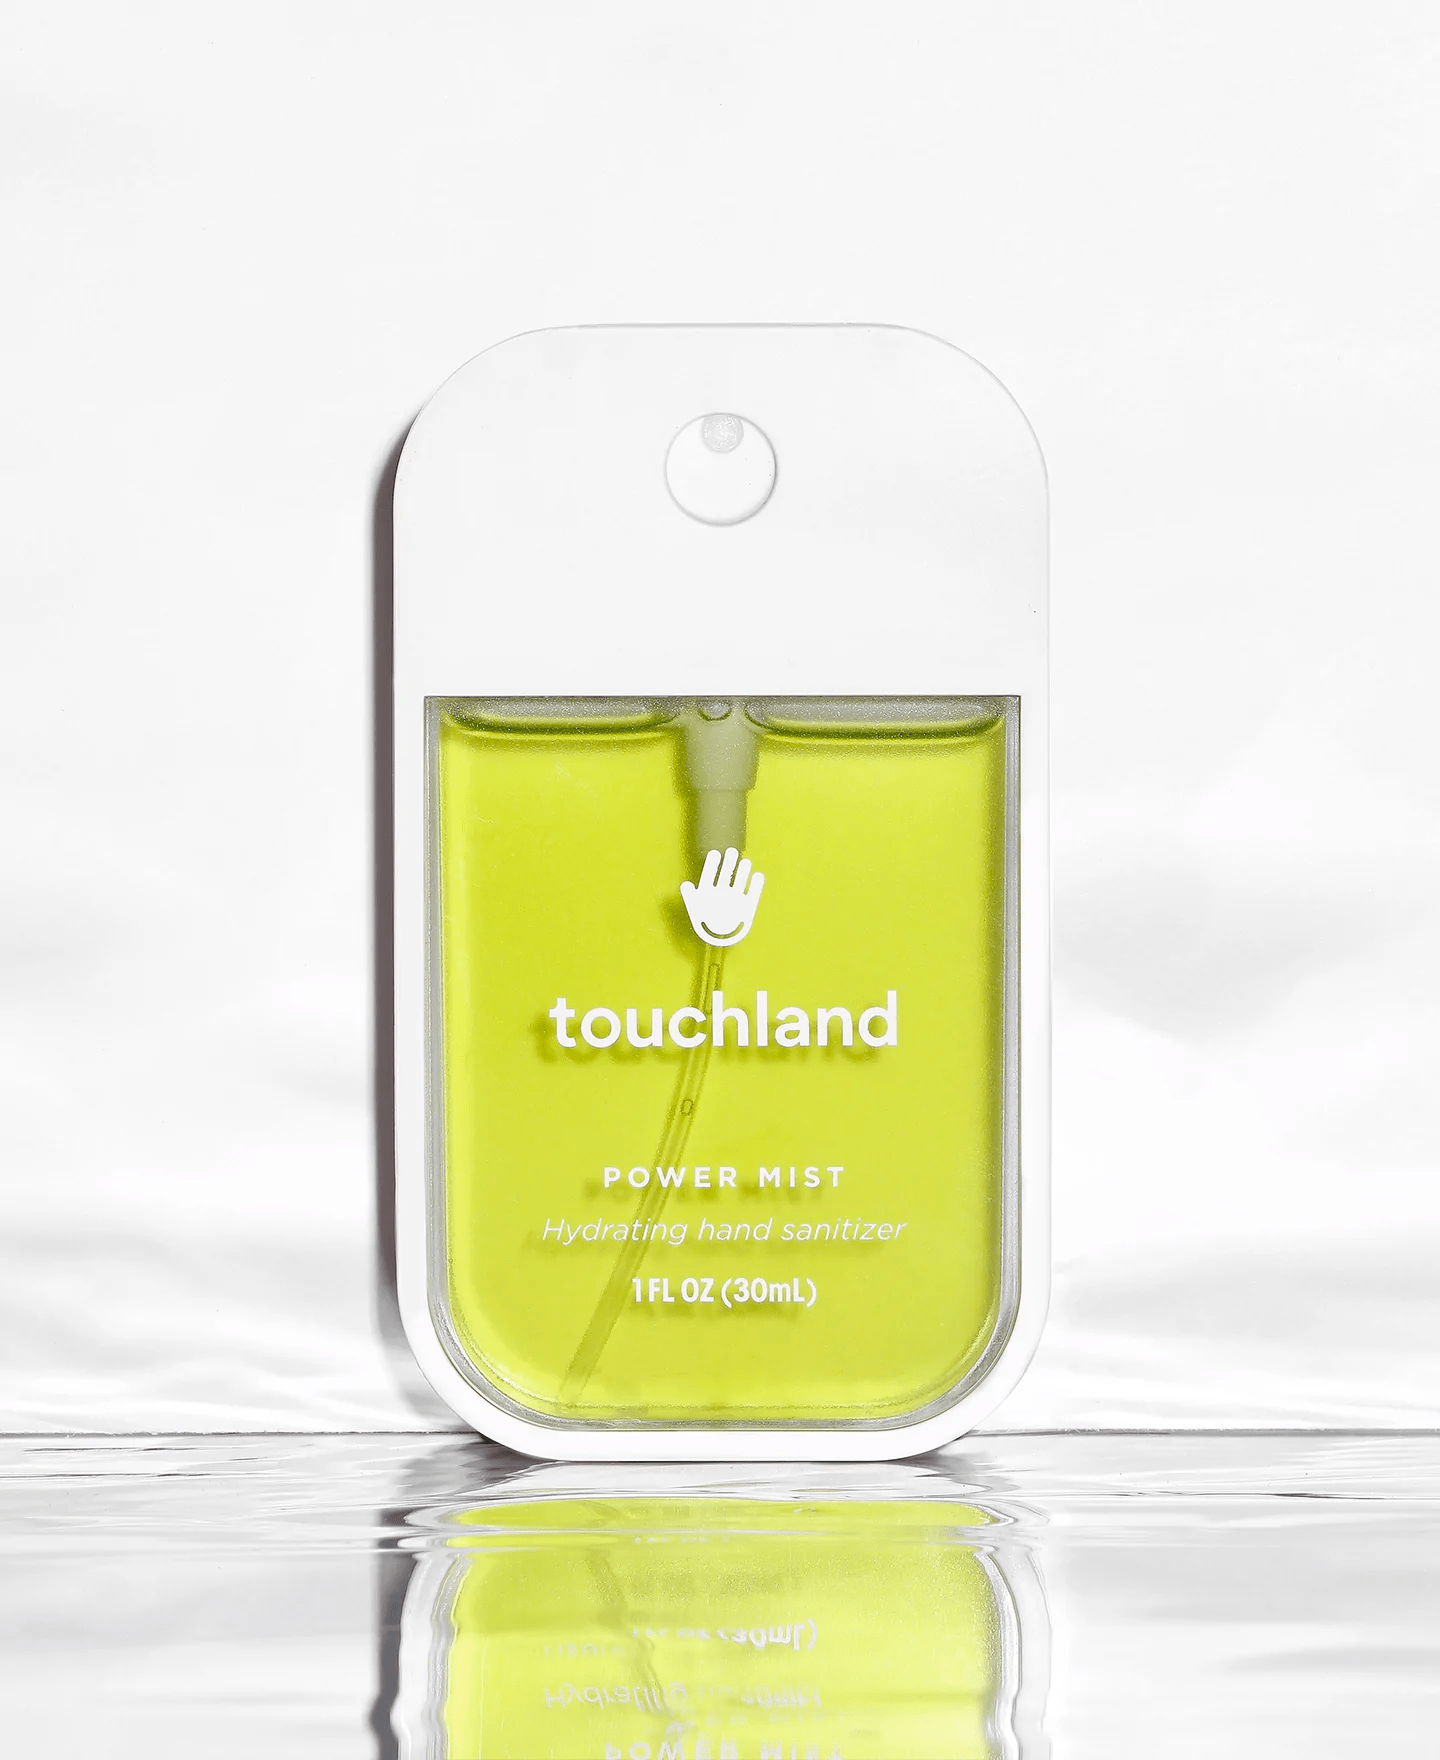 touchland hand sanitizers, best stocking stuffers for women